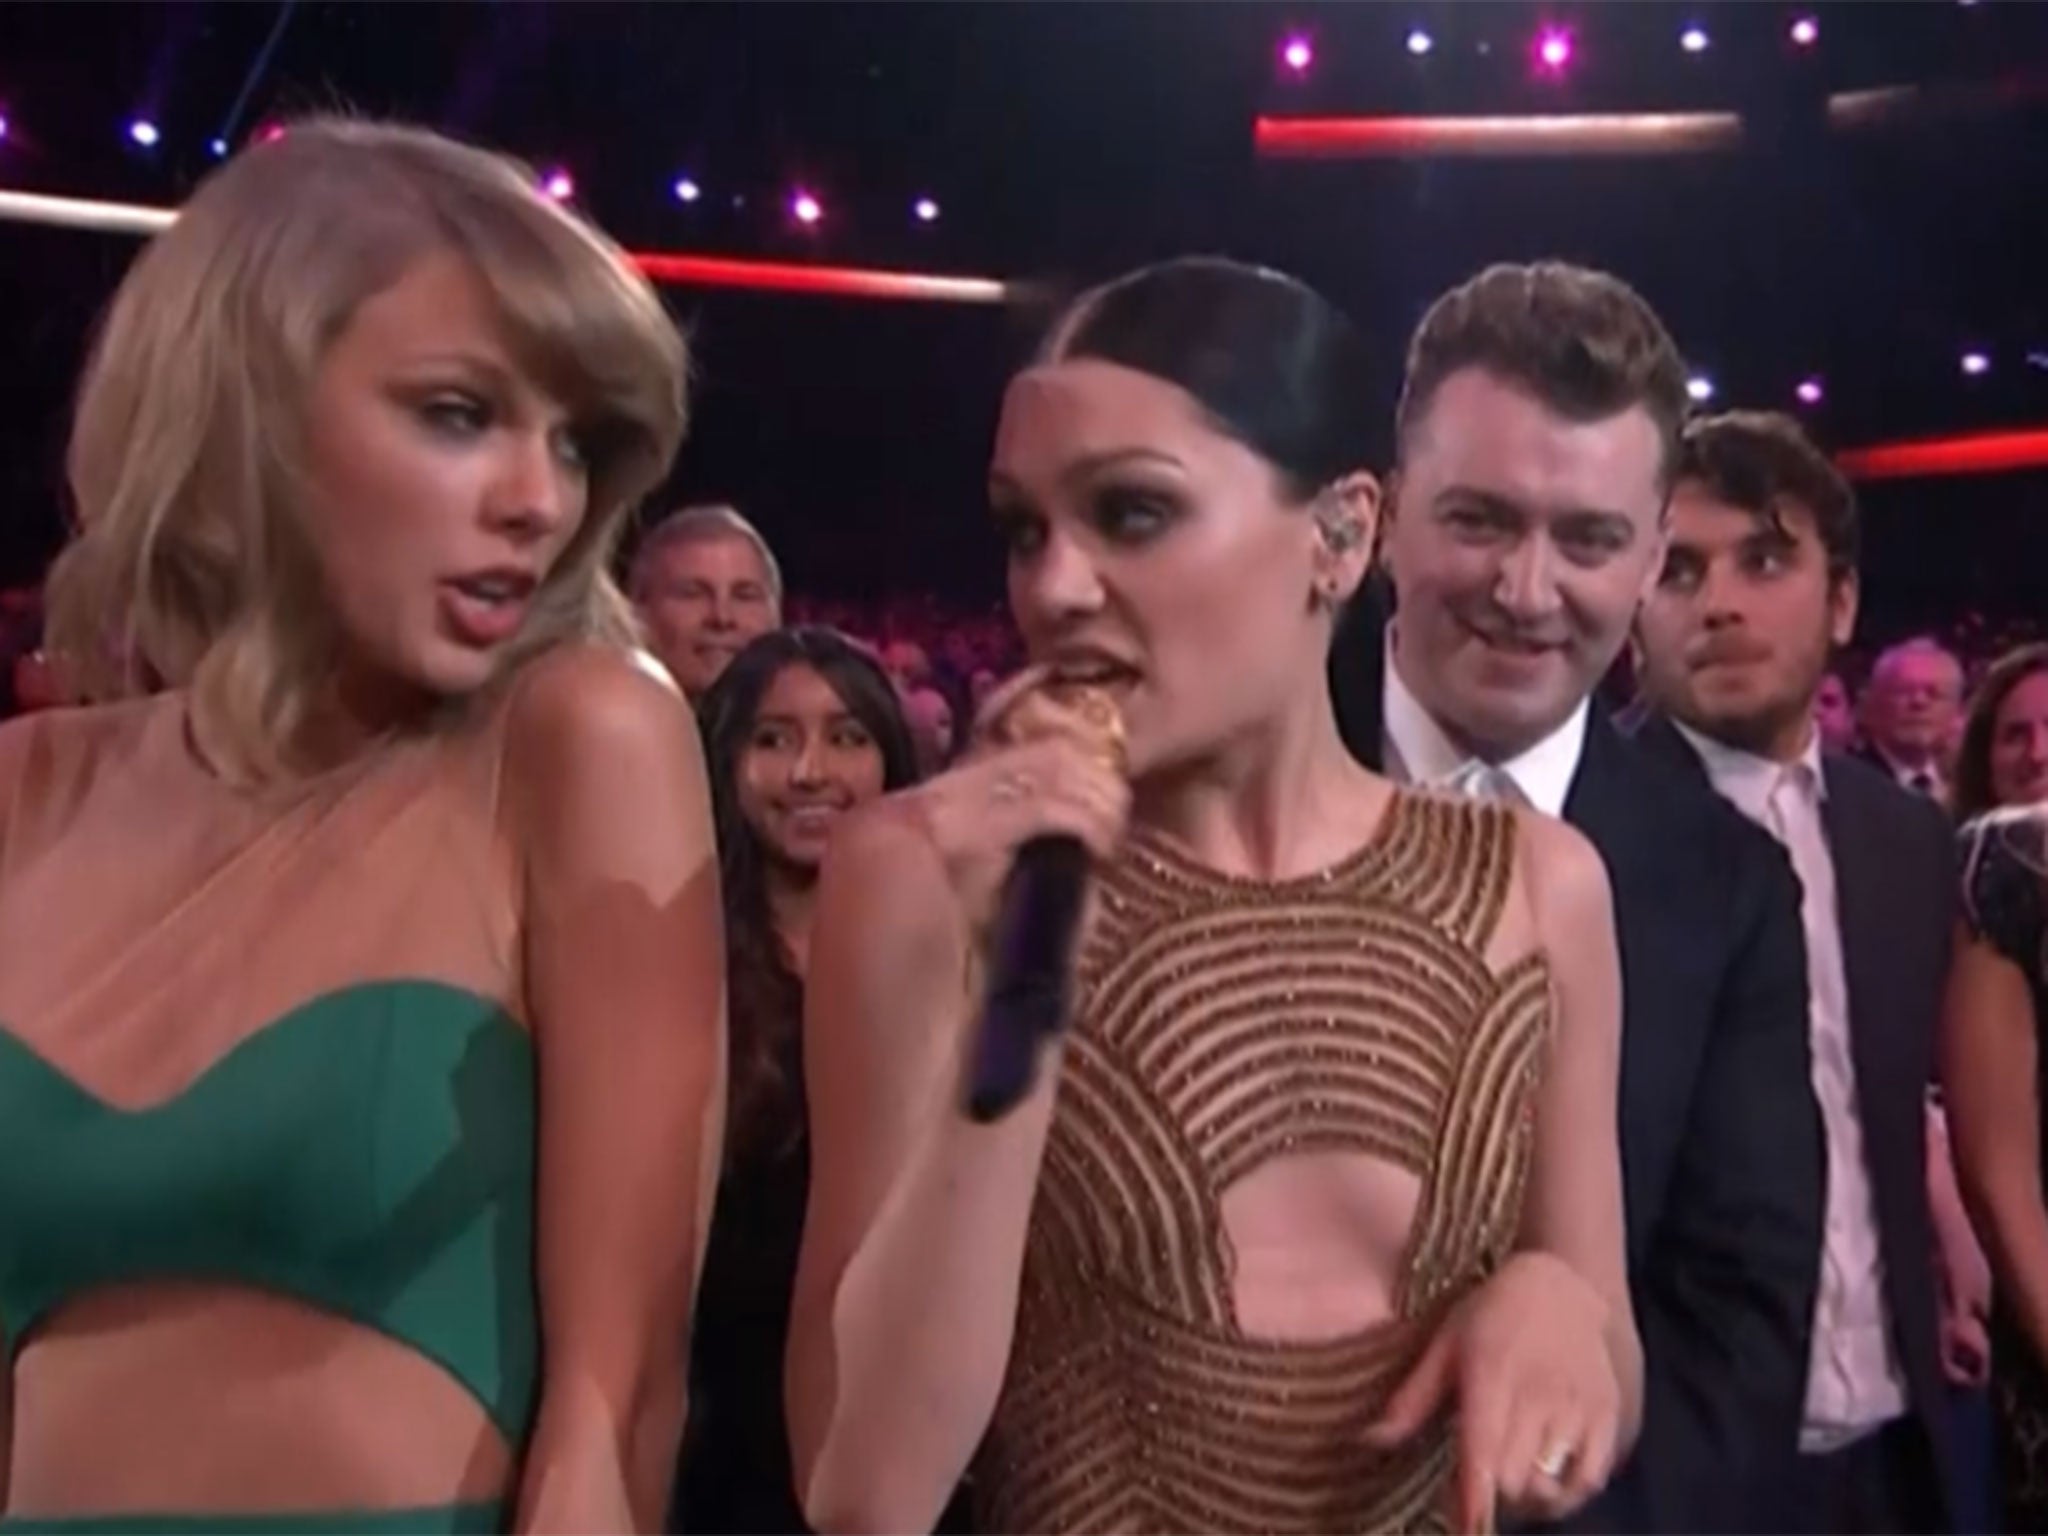 Taylor Swift dances with Sam Smith and Jessie J at the American Music Awards in Los Angeles.